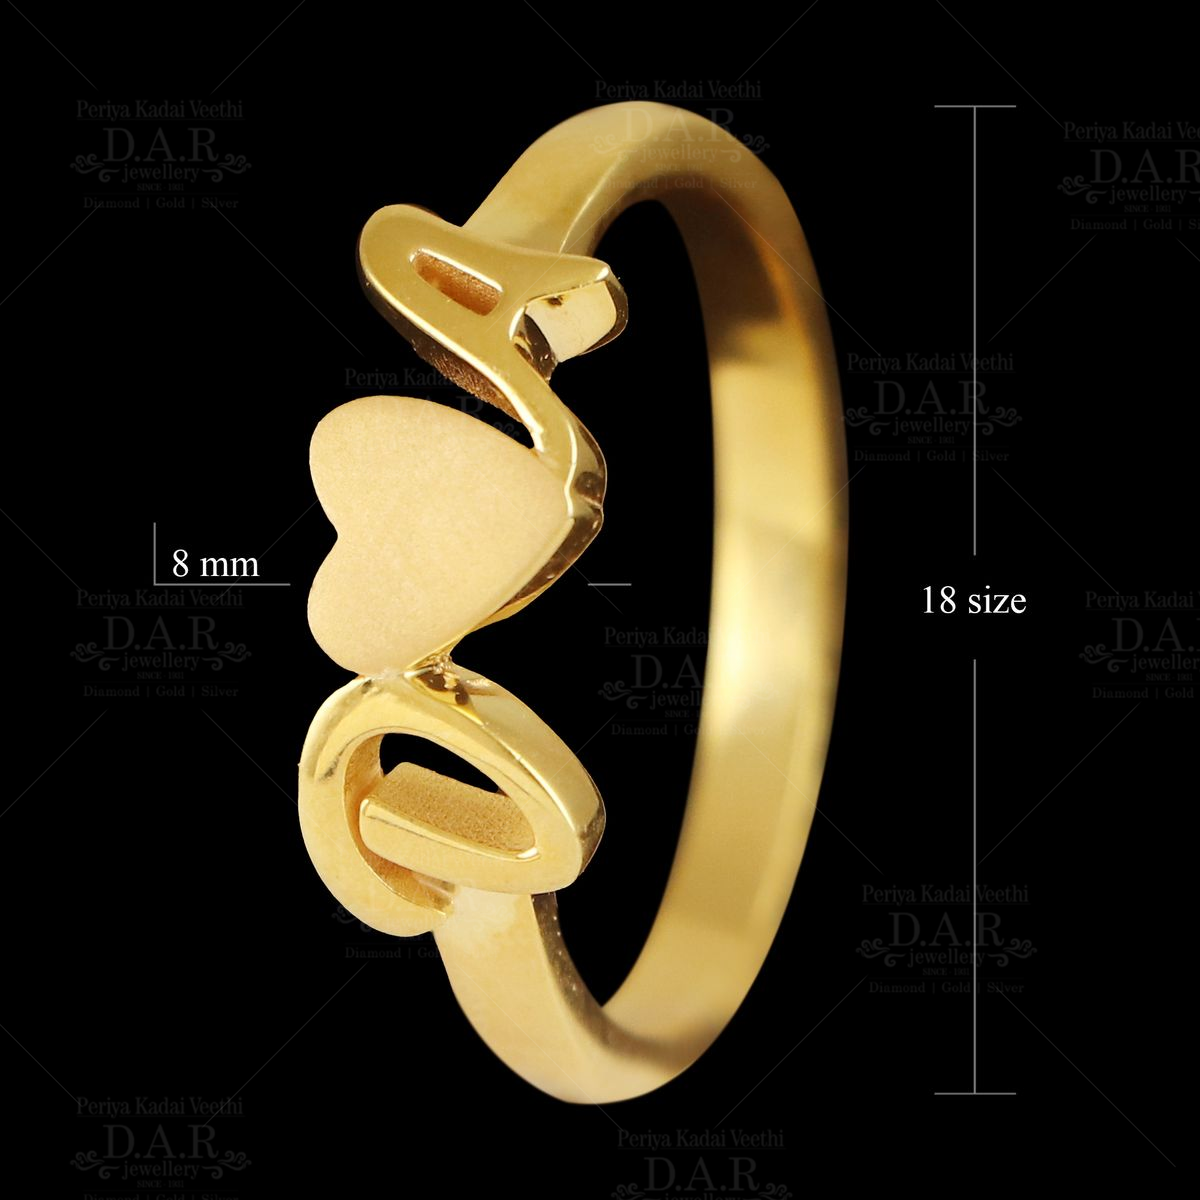 Beaux Bijoux Alphabet Letter A, B, C, D, E, G, H, J, K, L M, N, P, R, S, T  Stackable Initial Hammered Band Ring 14K Gold Plated Sterling Silver  Jewelry for